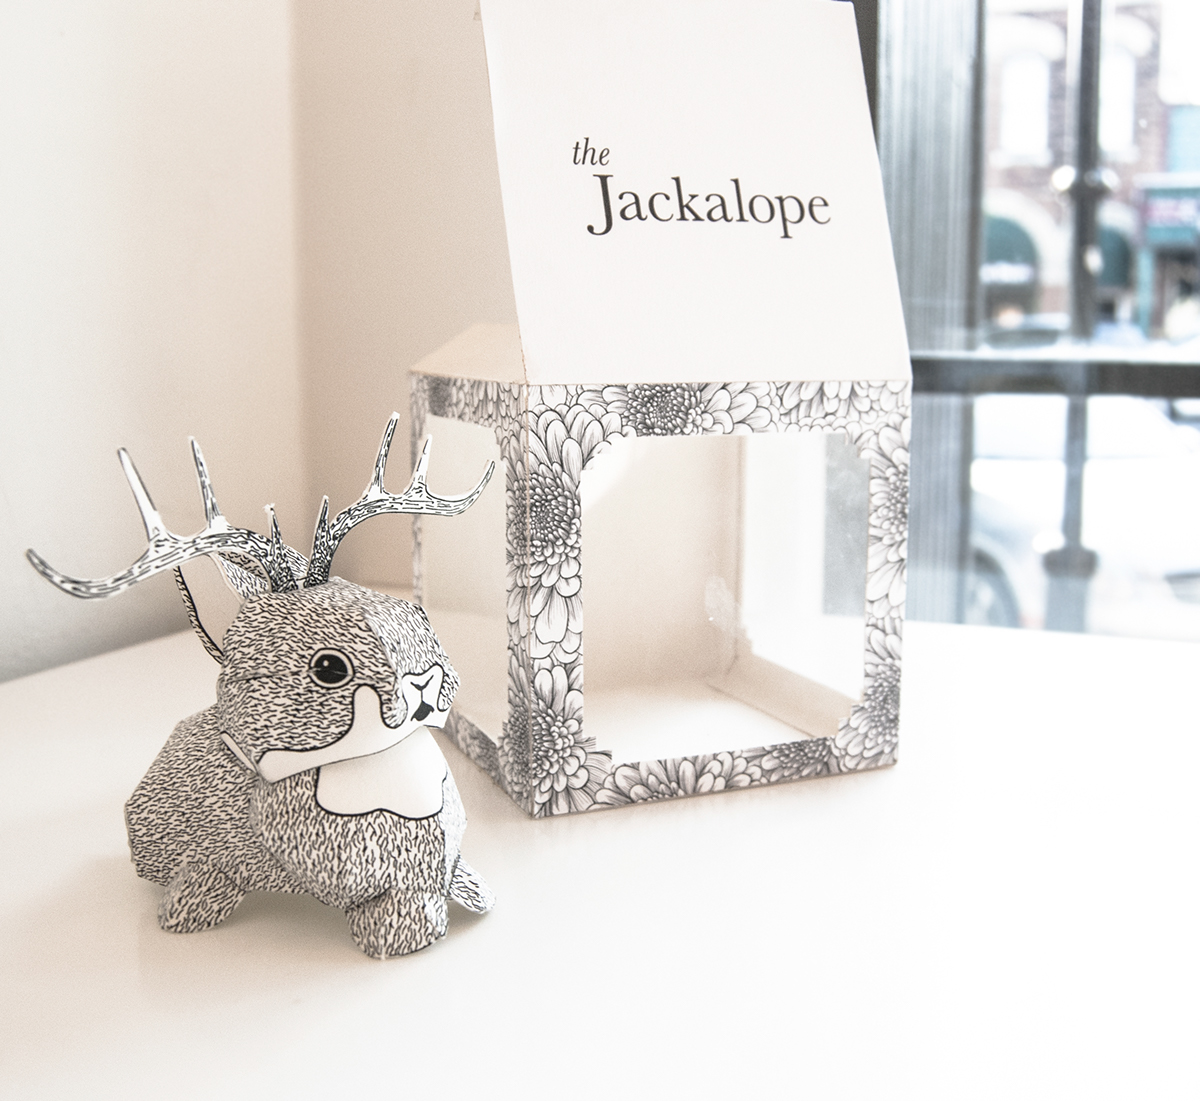 letterpress rabbit bunny antelope paper toy jackalope box floral toy outdoors Nature mythical paper craft paper model origami 